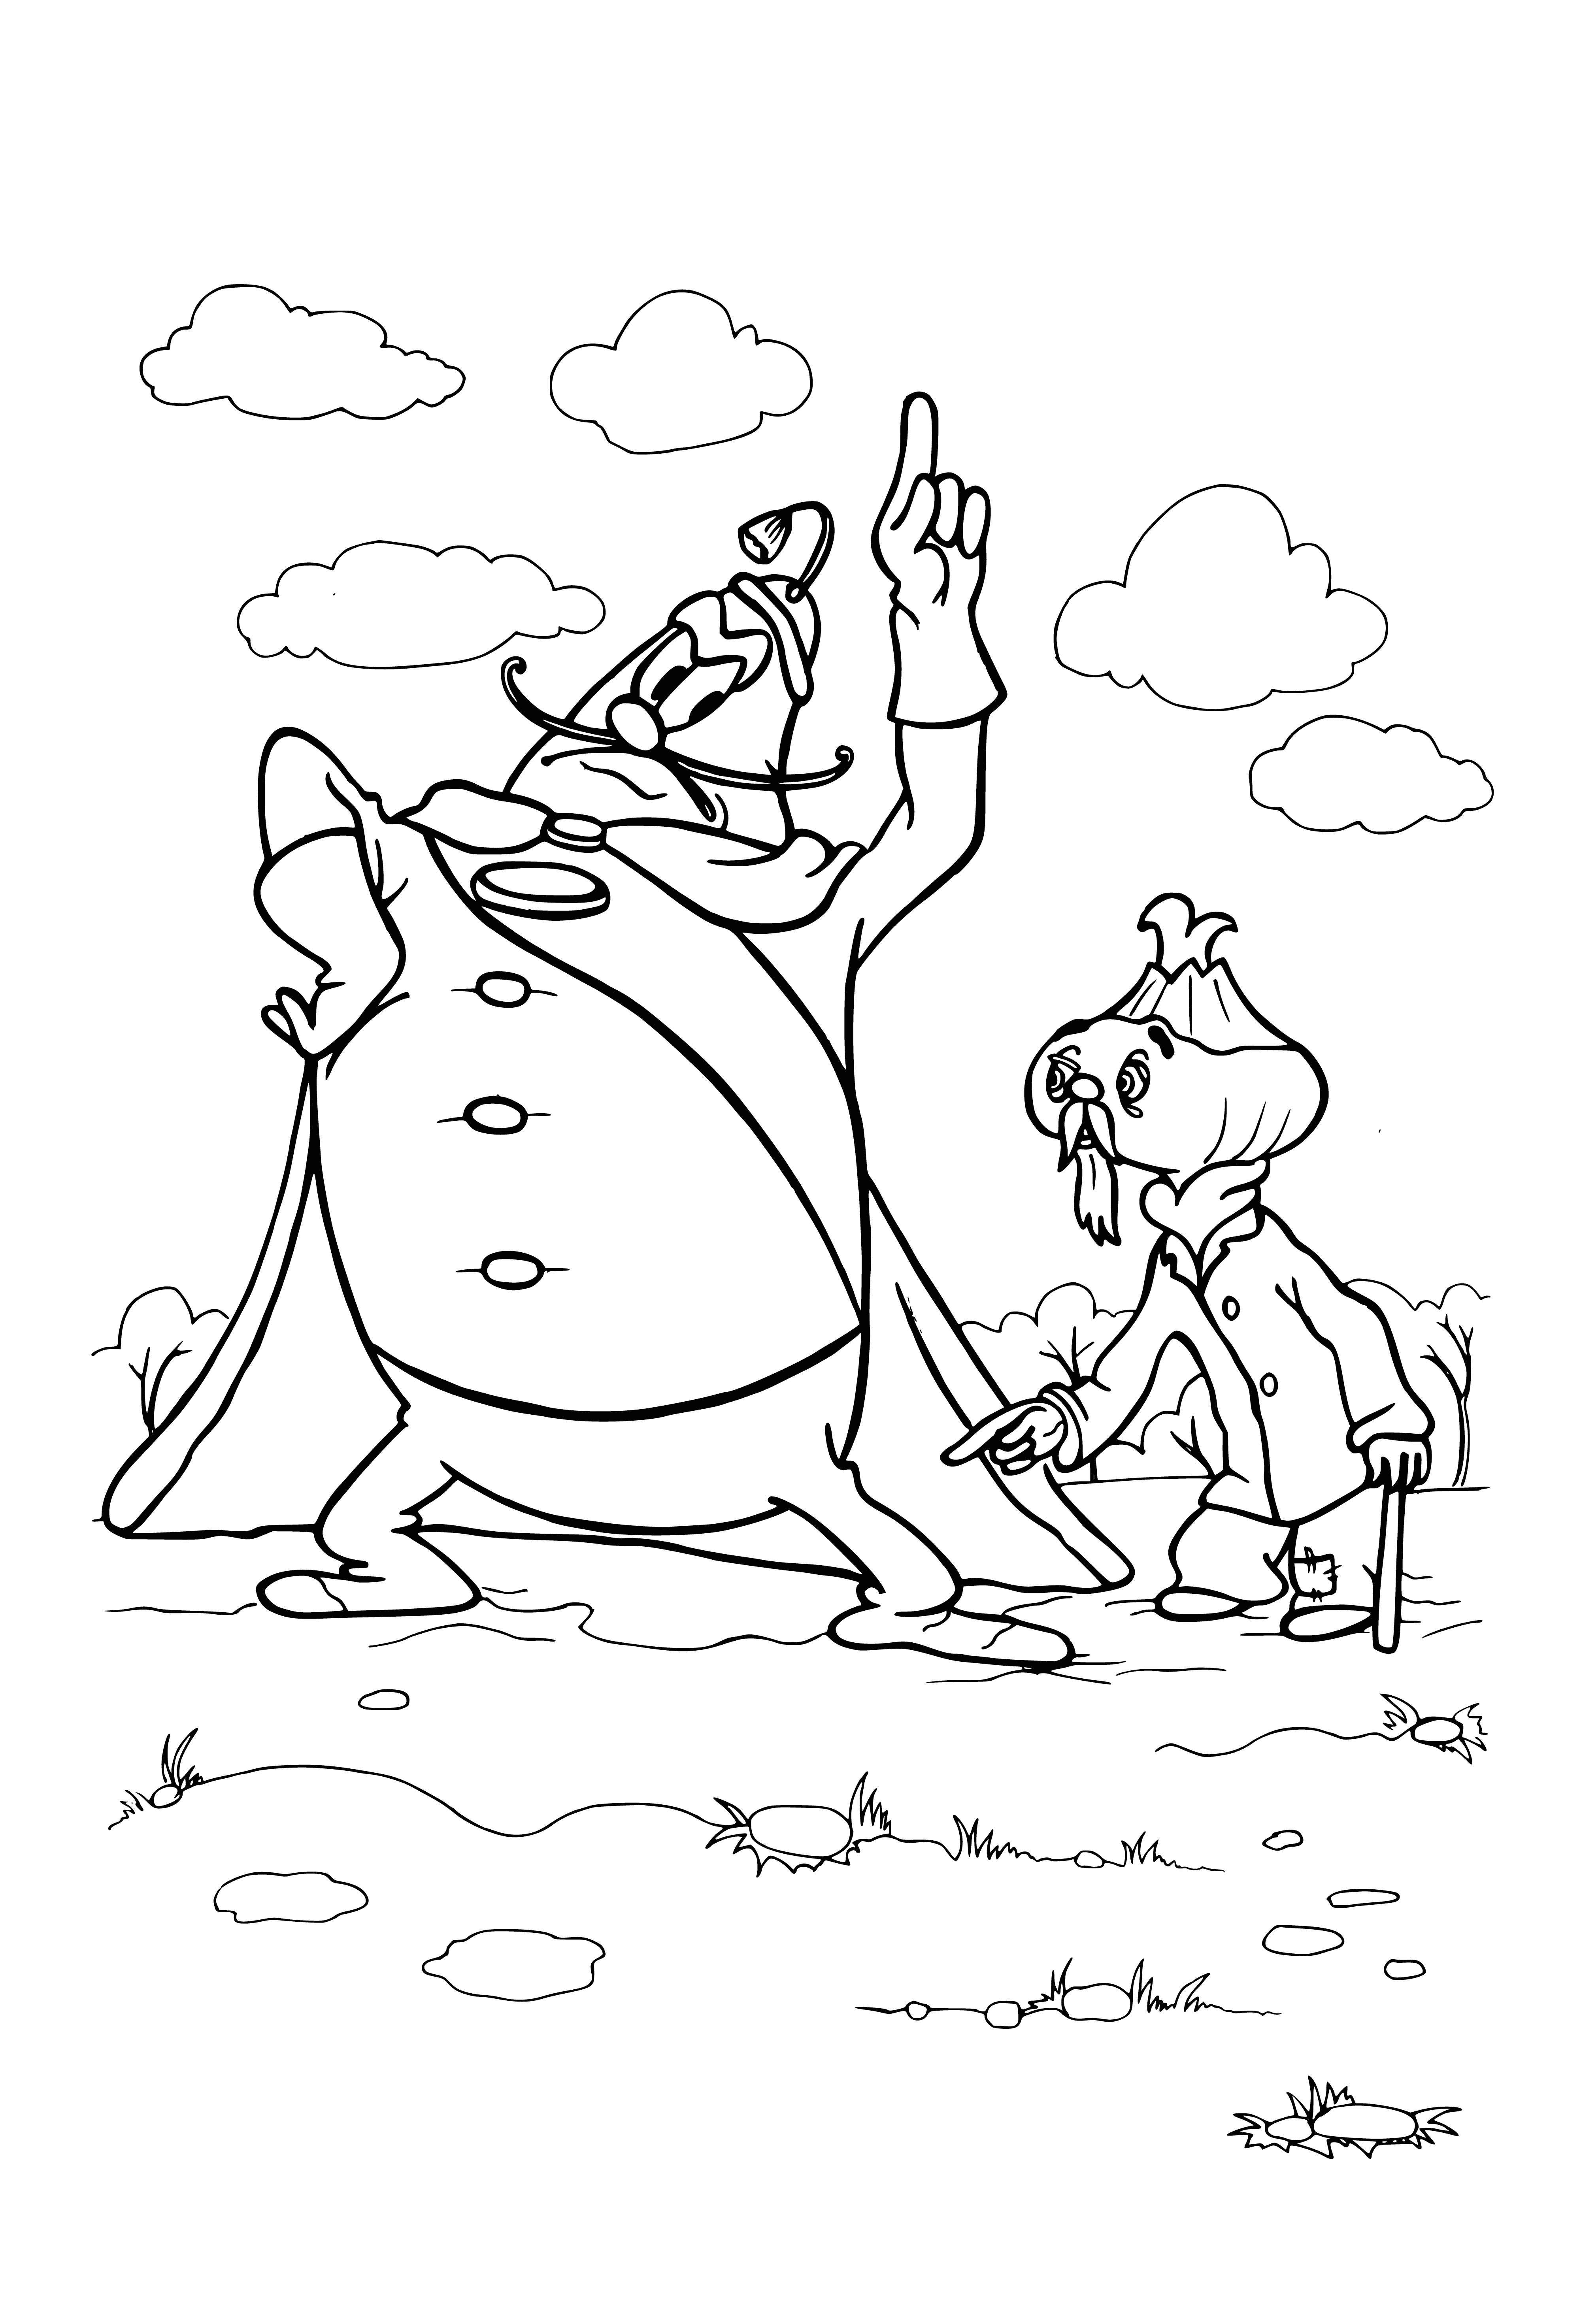 coloring page: Cipollino is a brave, resourceful, and creative little boy ready for any adventure. His courage and intelligence often land him in trouble with the authorities.